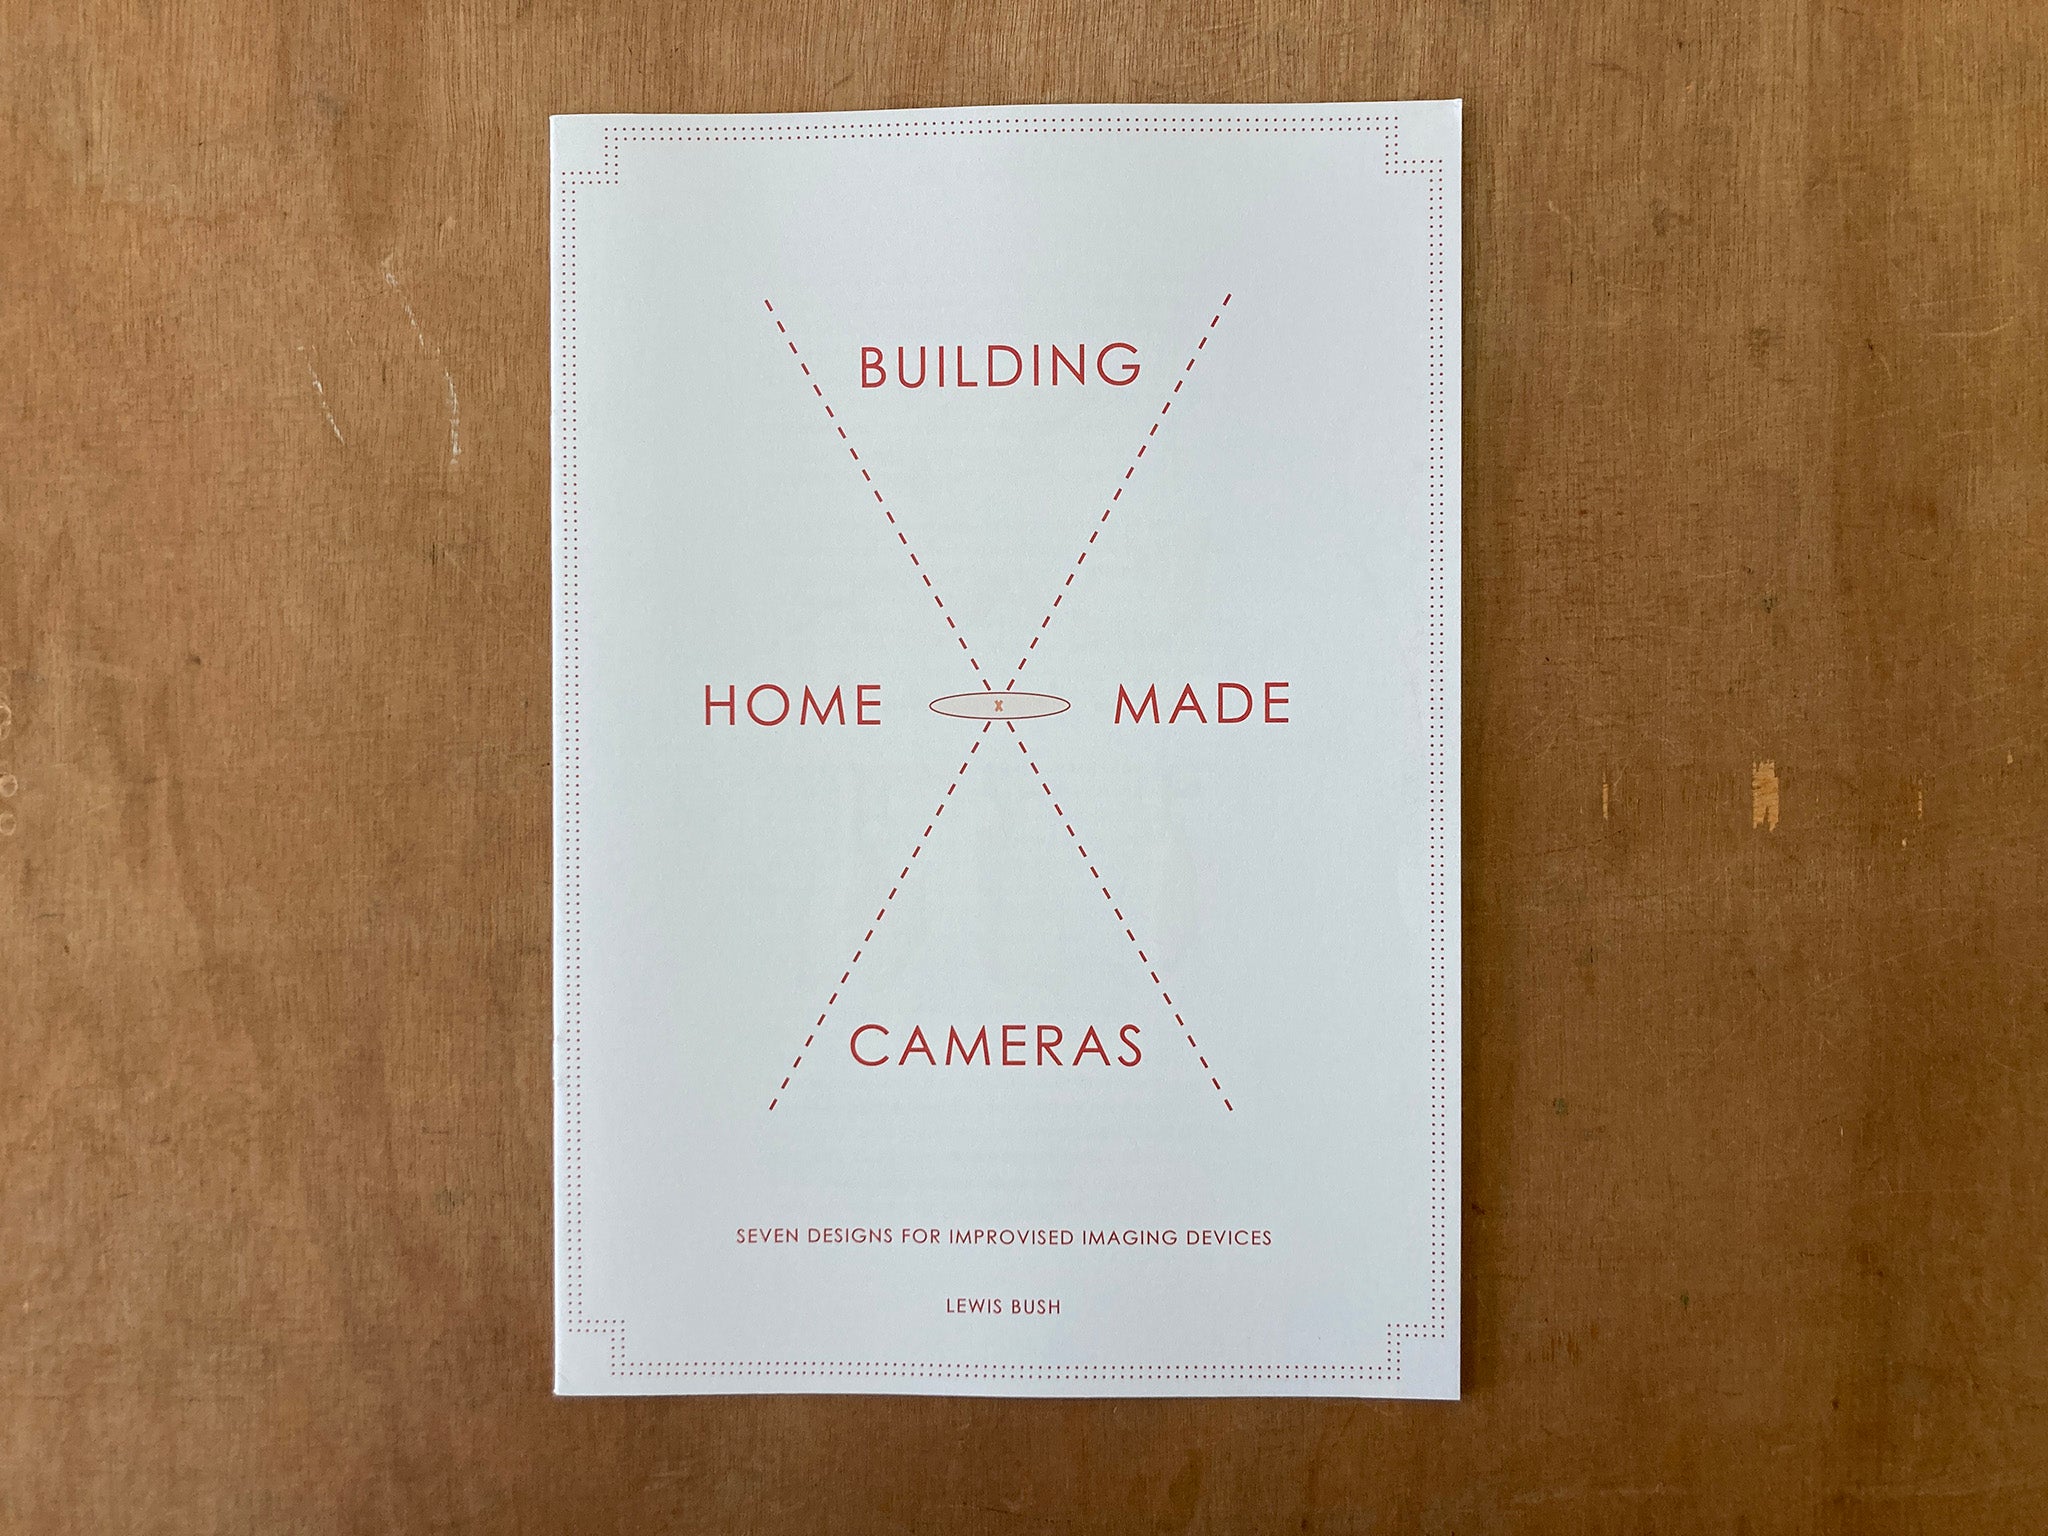 BUILDING HOME MADE CAMERAS by Lewis Bush